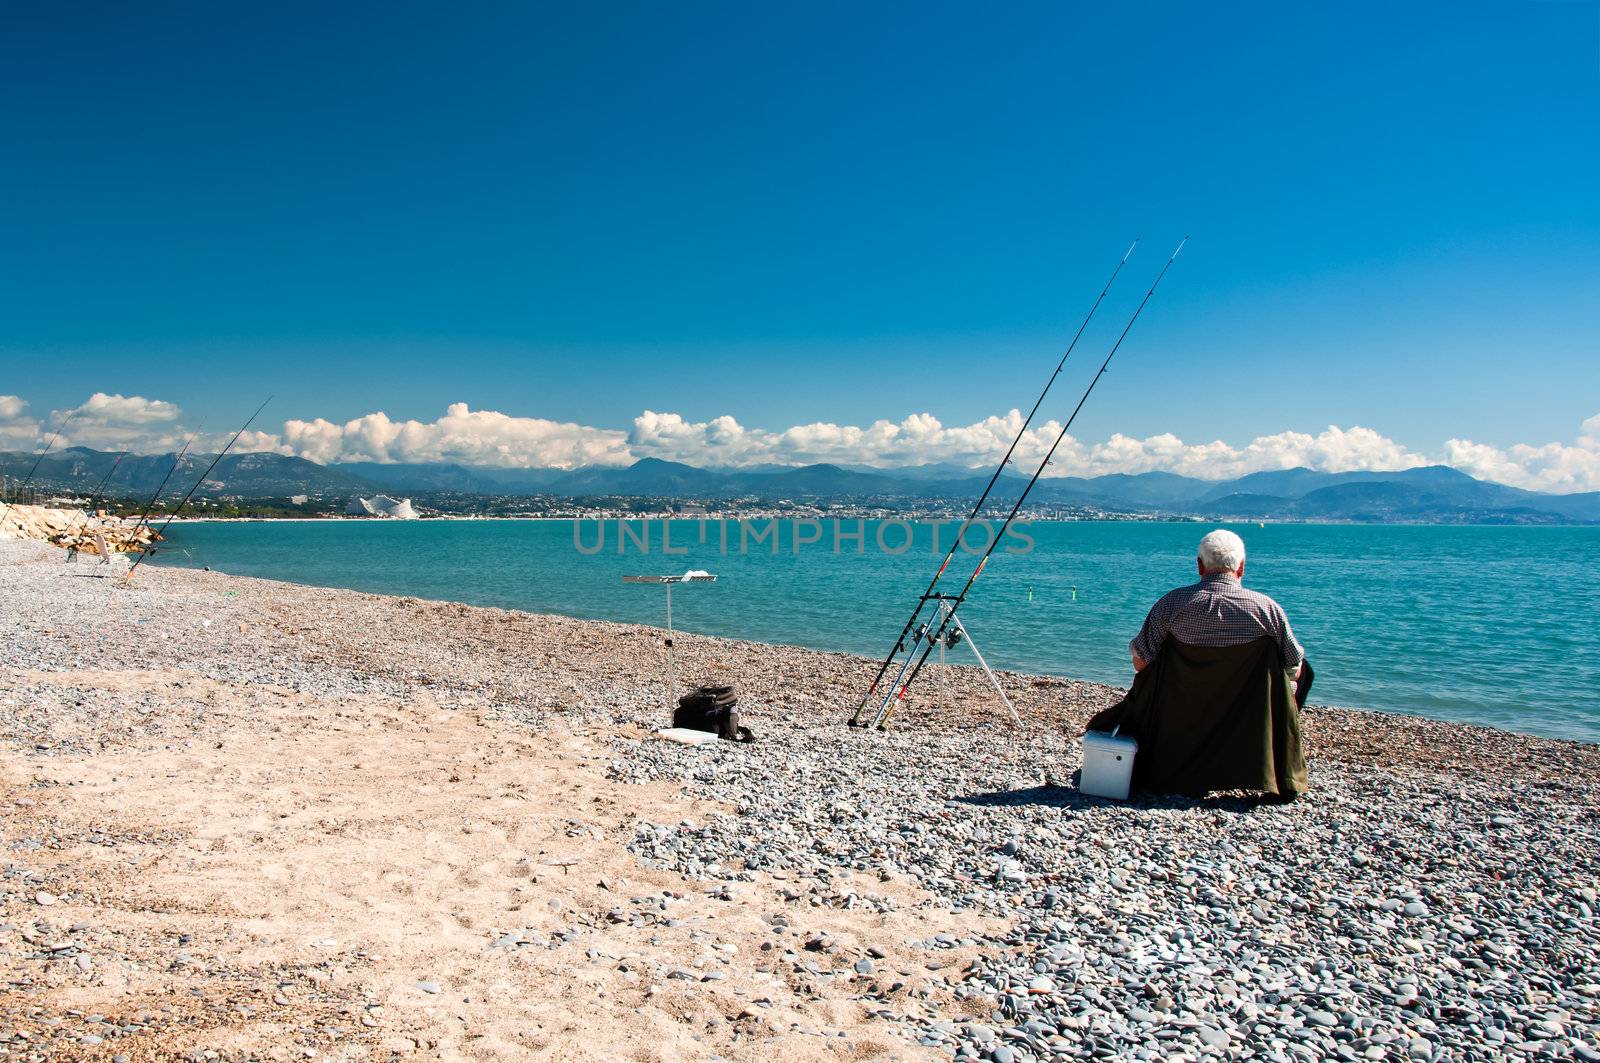 Senior fisherman at blue sea coast during sunny day by martinm303